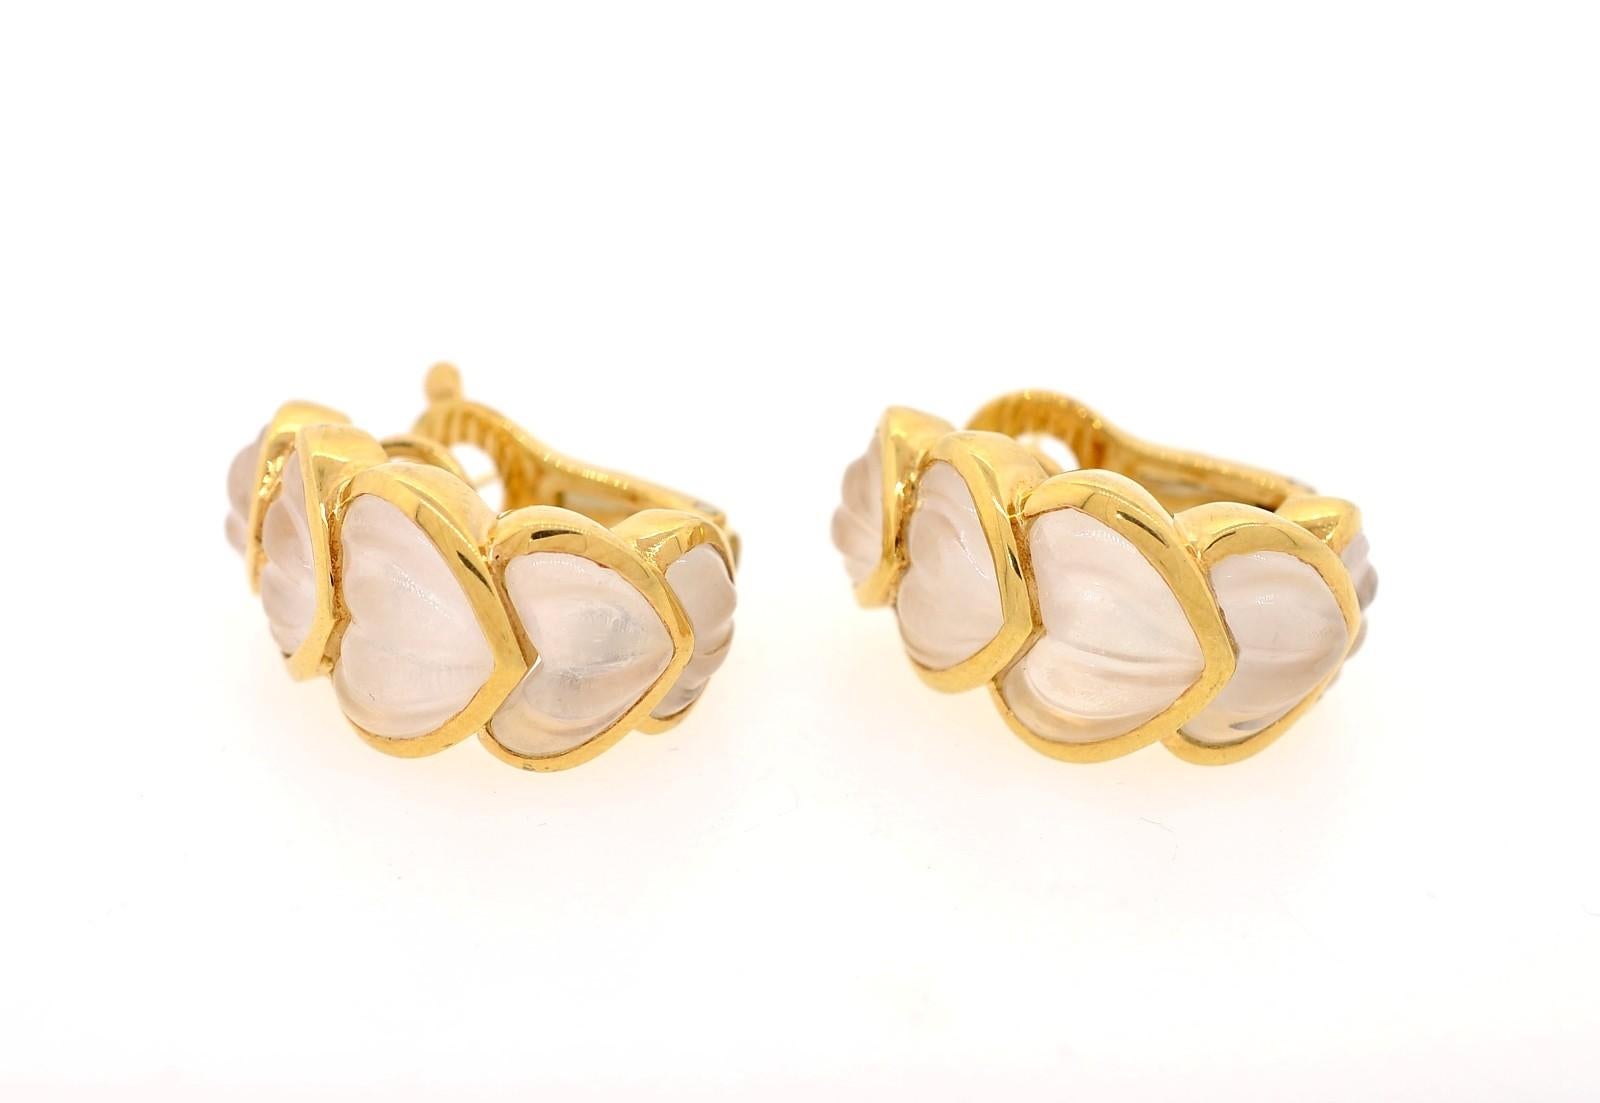 Boucheron Rock Crystal and 18 Karat Gold Earrings In Good Condition For Sale In Beverly Hills, CA